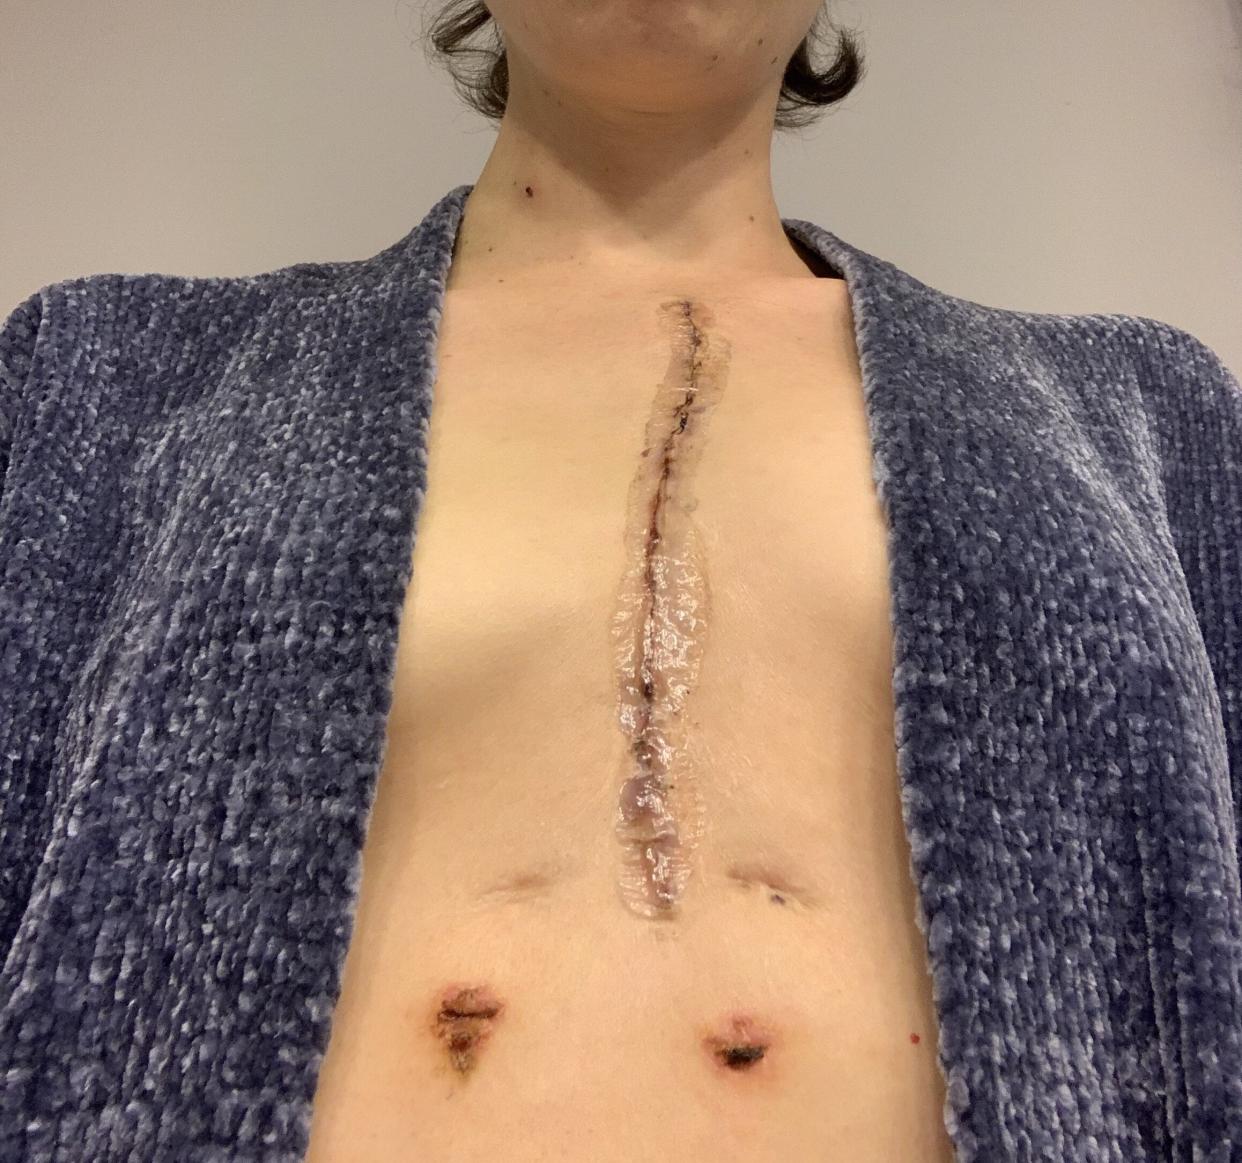 The author's median sternotomy and chest tube scars three weeks post-op. (Photo: Photo Courtesy Of Clare Almand)